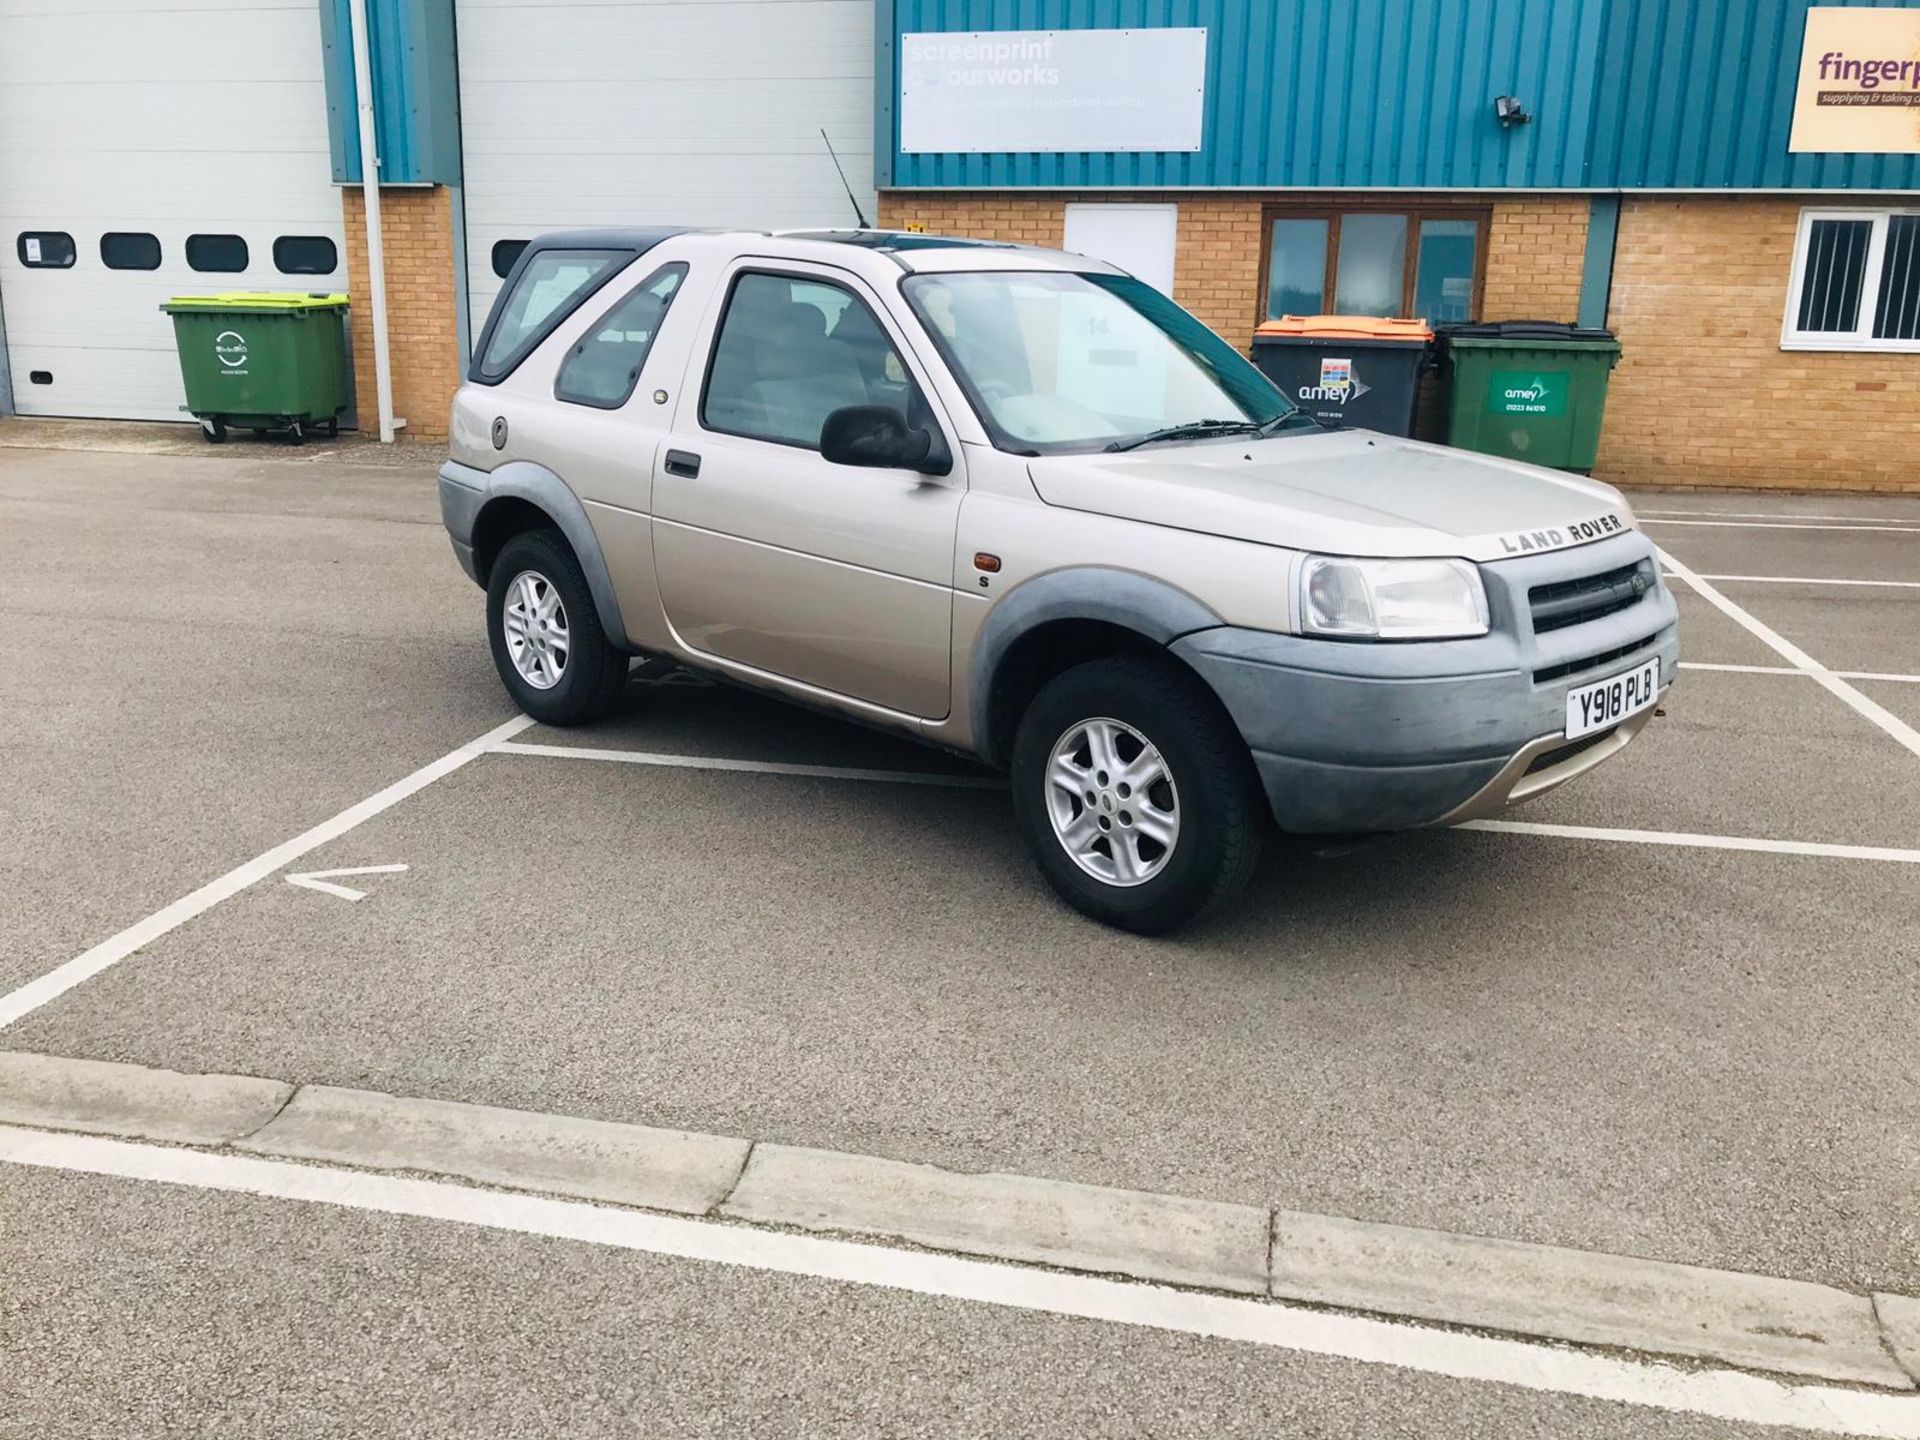 (RESERVE MET)Land Rover Freelander 2.0 TD4 S Auto - 2001 Reg - Tow Pack - Spare Wheel - Winter Ready